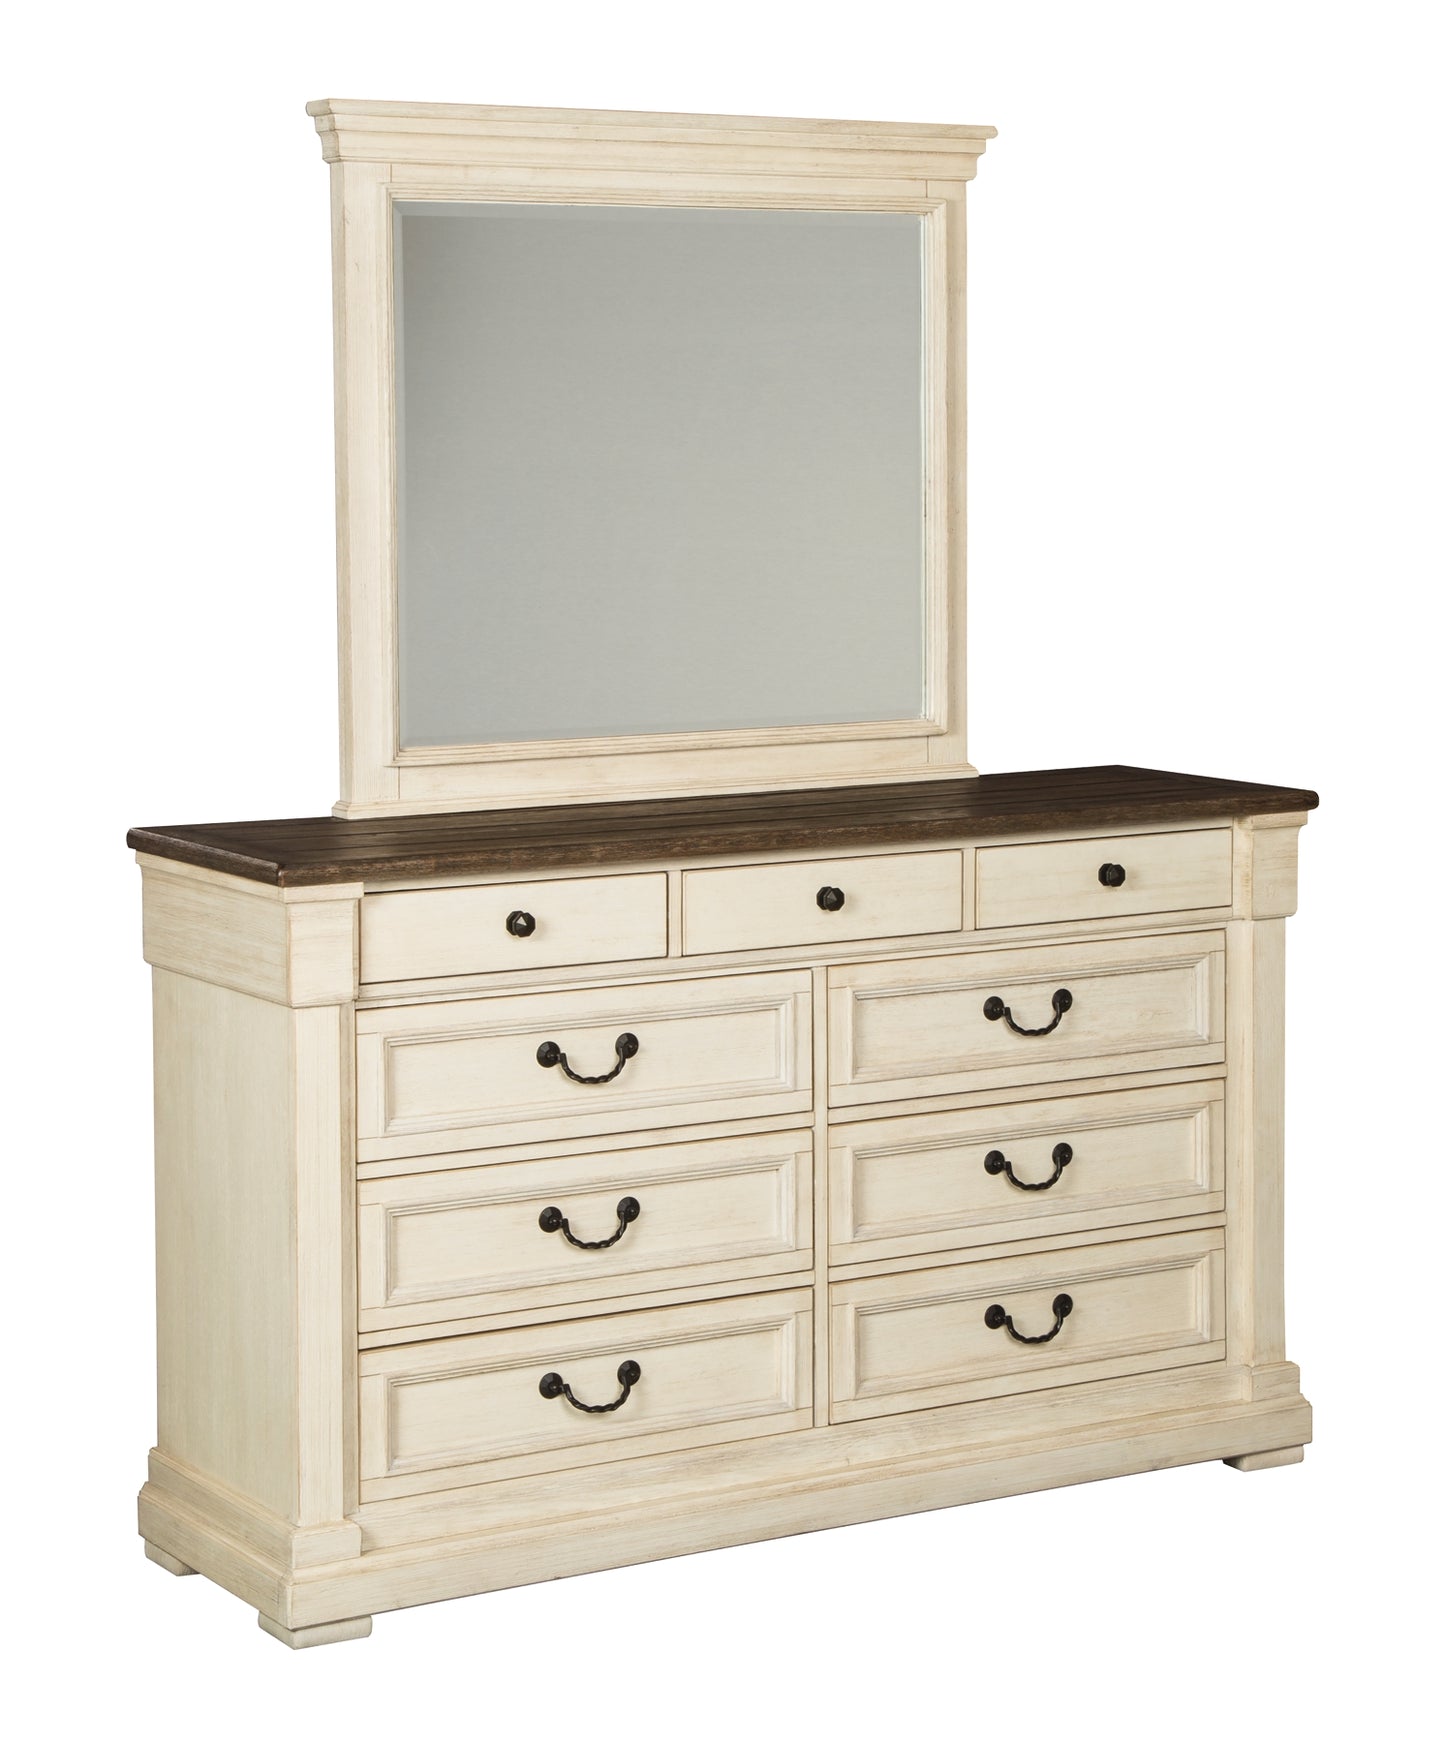 Bolanburg California King Panel Bed with Mirrored Dresser and 2 Nightstands